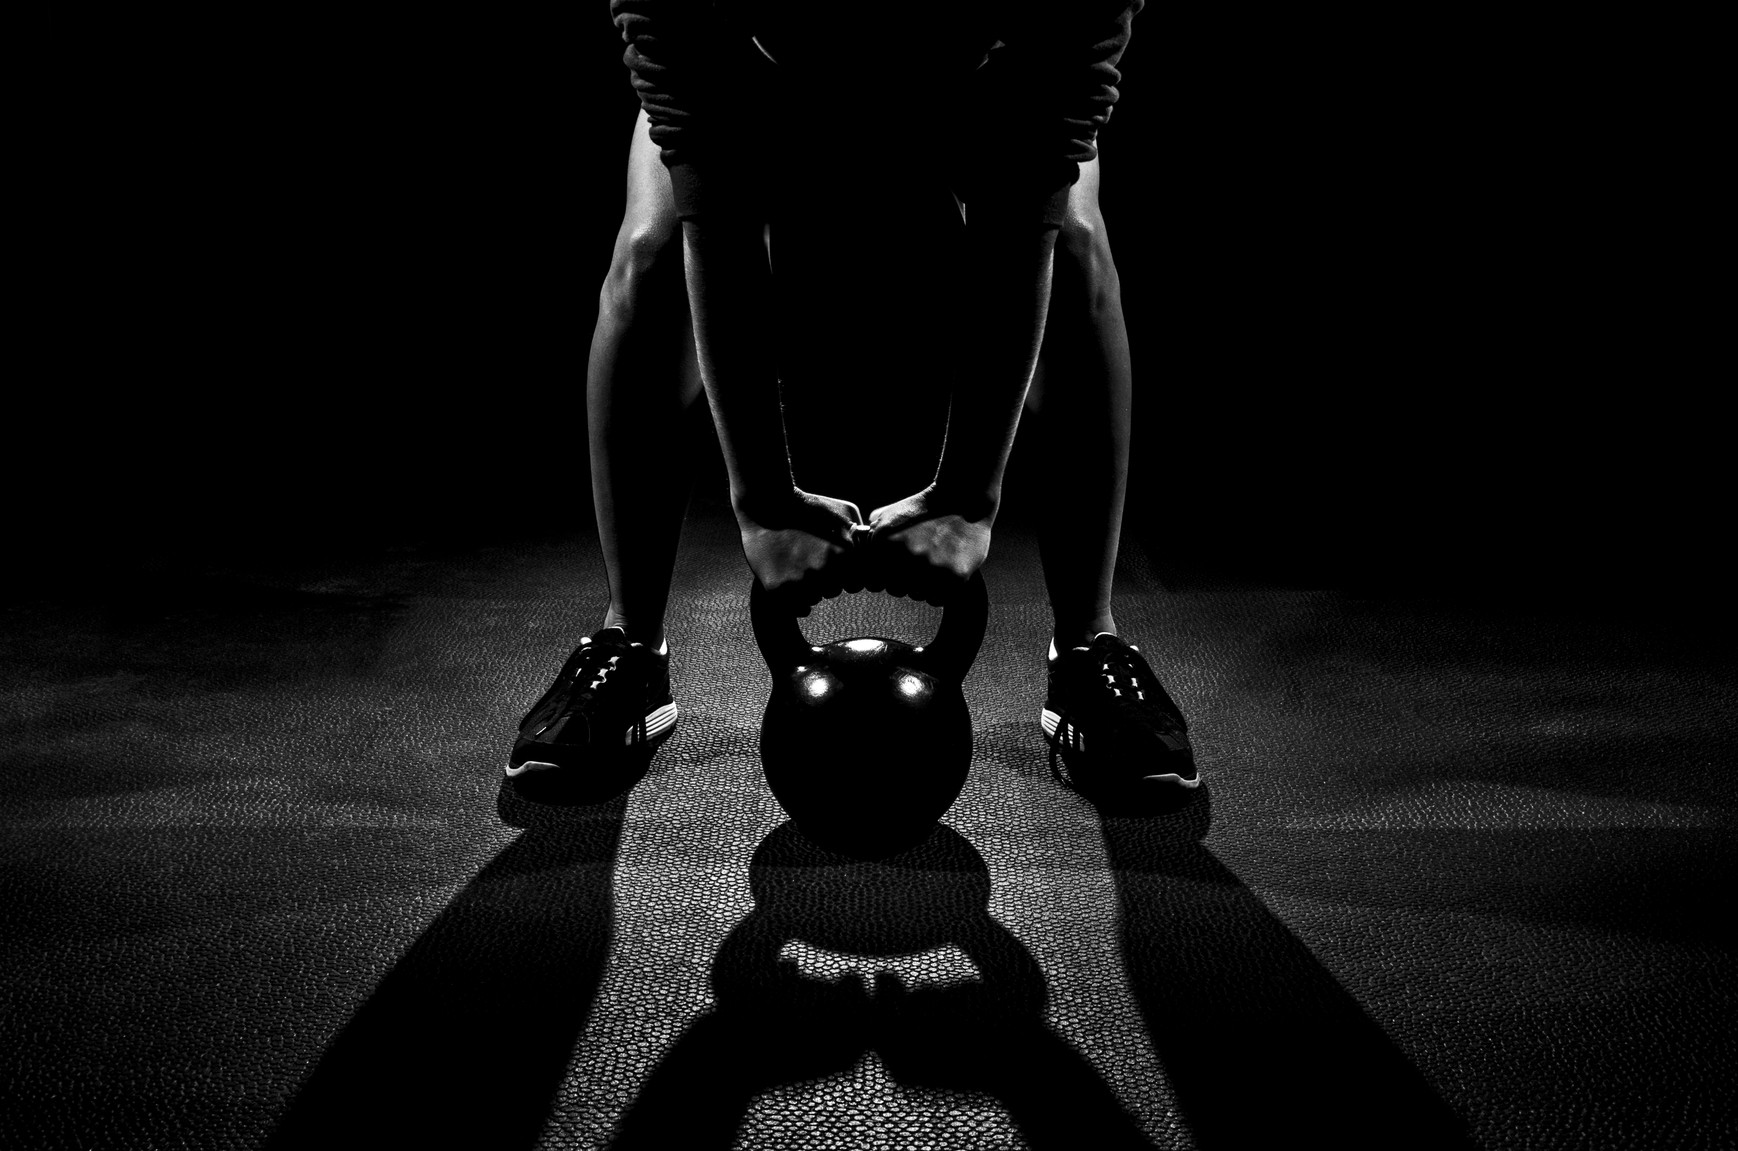 Crossfit Wallpapers High Quality Download Free HD Wallpapers Download Free Images Wallpaper [wallpaper981.blogspot.com]